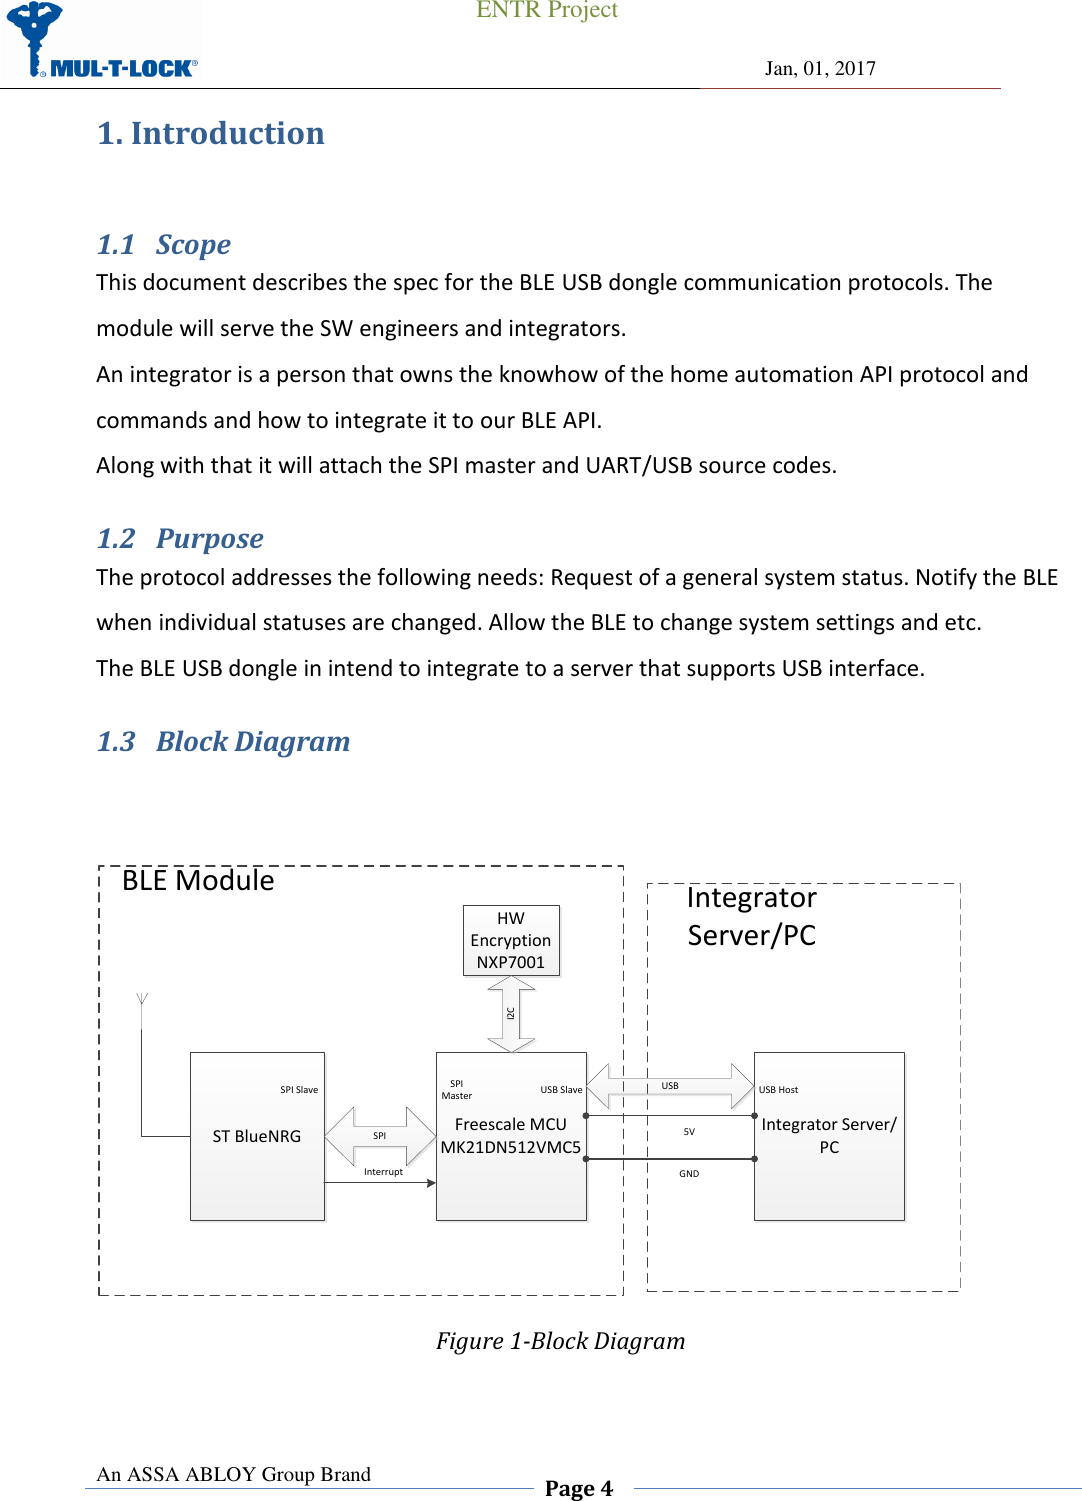                                                 ENTR Project                Jan, 01, 2017  An ASSA ABLOY Group Brand  Page 4    1. Introduction  1.1 Scope This document describes the spec for the BLE USB dongle communication protocols. The module will serve the SW engineers and integrators.  An integrator is a person that owns the knowhow of the home automation API protocol and commands and how to integrate it to our BLE API. Along with that it will attach the SPI master and UART/USB source codes. 1.2 Purpose The protocol addresses the following needs: Request of a general system status. Notify the BLE when individual statuses are changed. Allow the BLE to change system settings and etc. The BLE USB dongle in intend to integrate to a server that supports USB interface. 1.3 Block Diagram     ST BlueNRG Freescale MCU MK21DN512VMC5 SPISPI MasterSPI SlaveInterruptHW Encryption NXP7001I2CIntegrator Server/PCUSBUSB Slave USB HostBLE Module5VGNDIntegratorServer/PC Figure 1-Block Diagram  